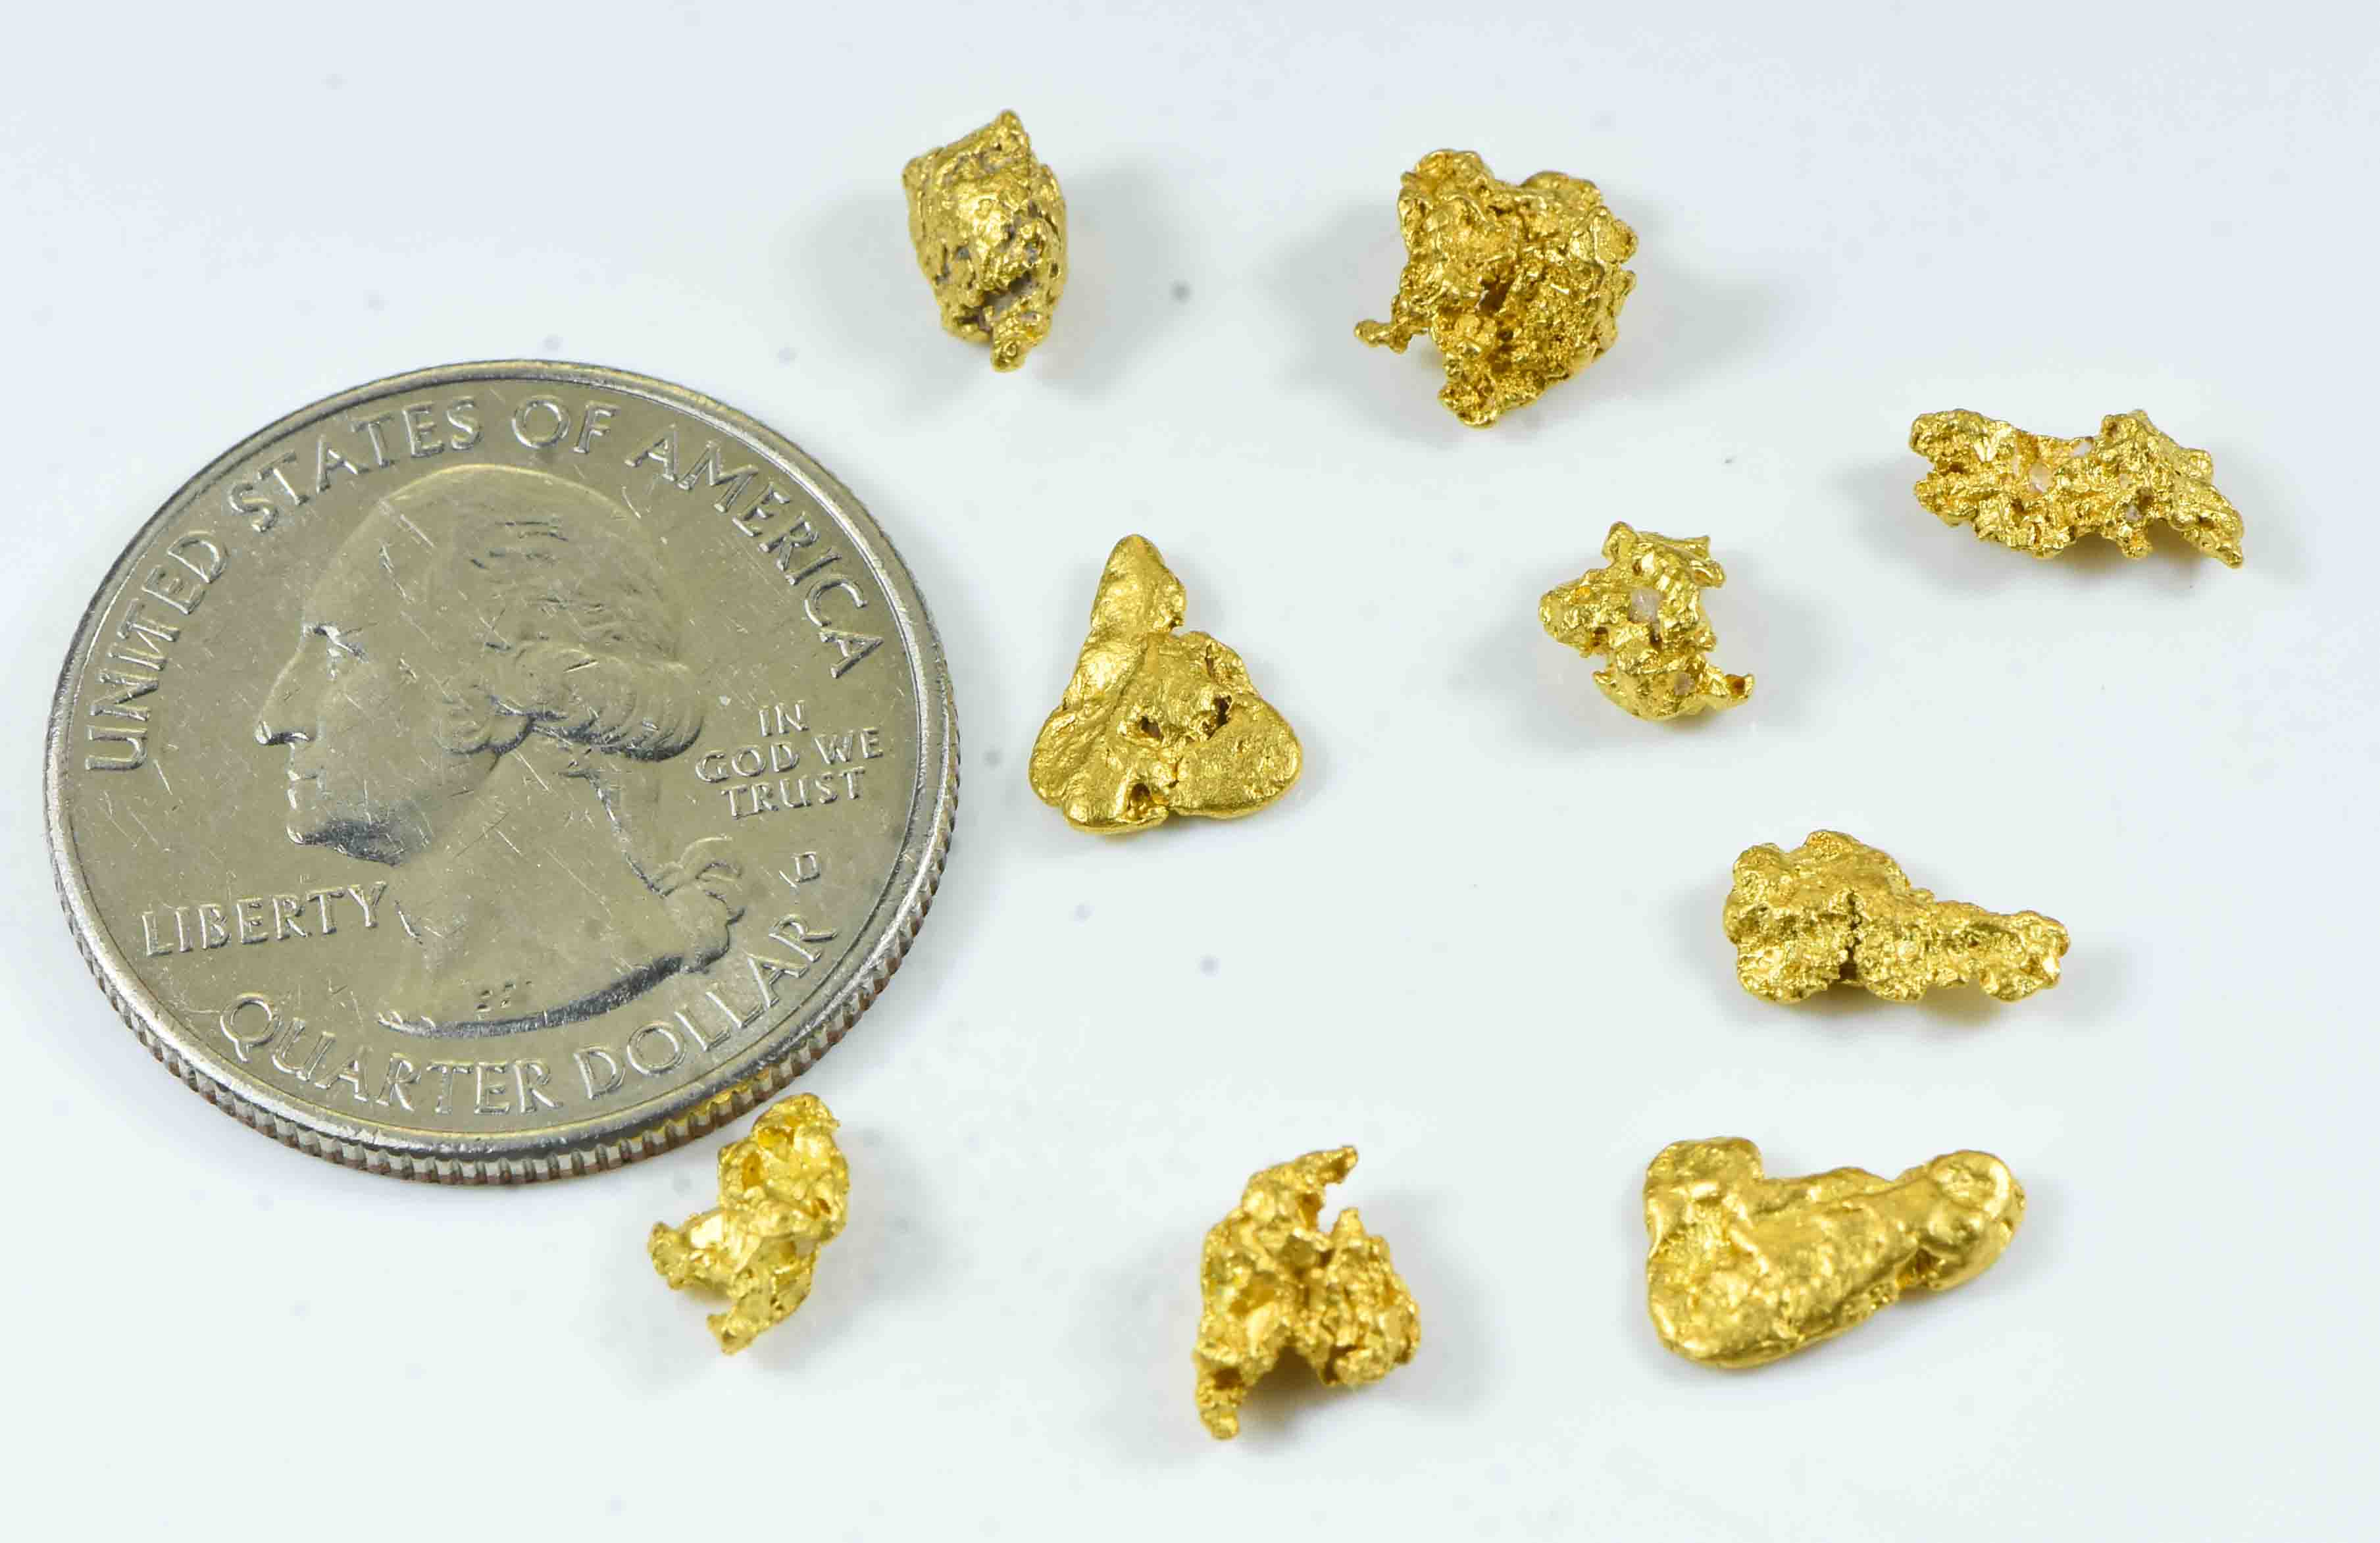 #29 Lot Of 8 Natural Gold Australian Nuggets 5.10 Total Grams